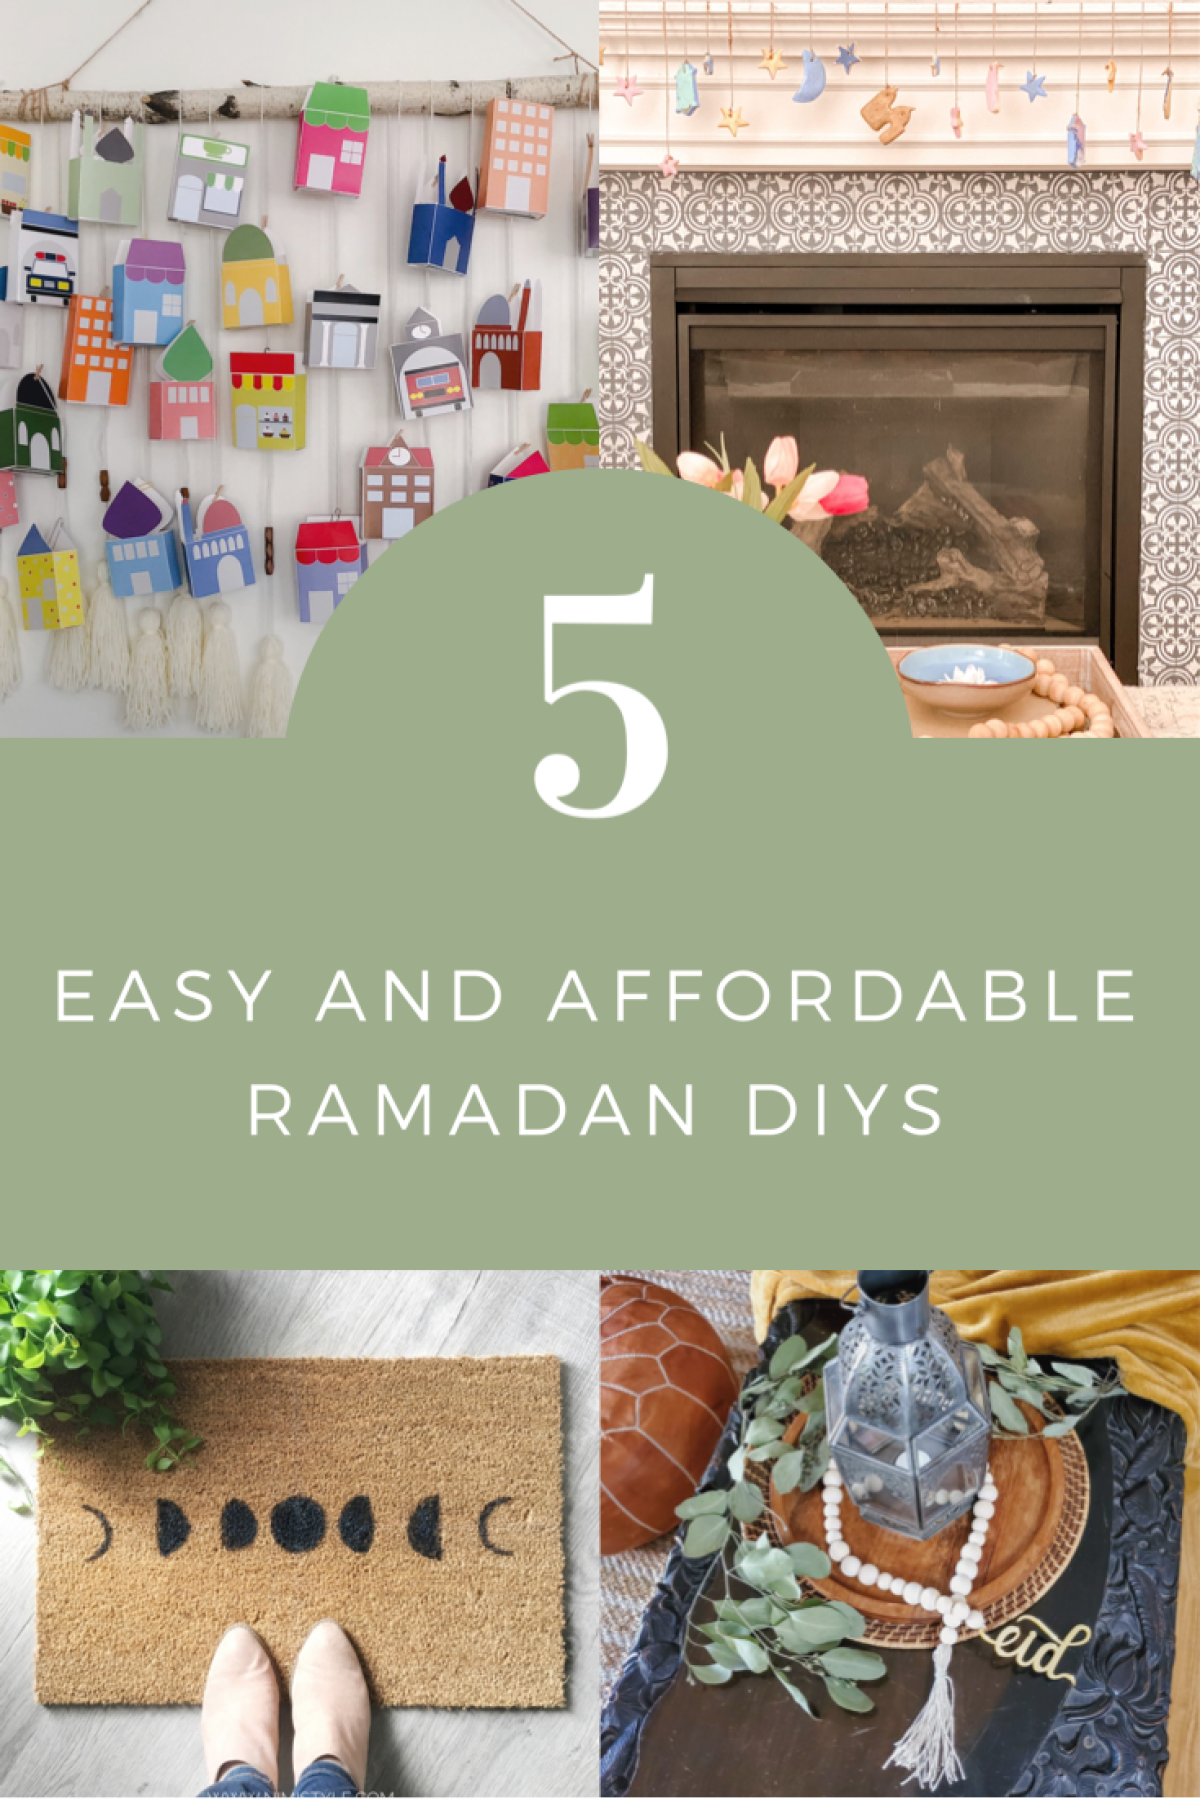 17 Simple Ramadan Decoration Ideas You Can Do at Home